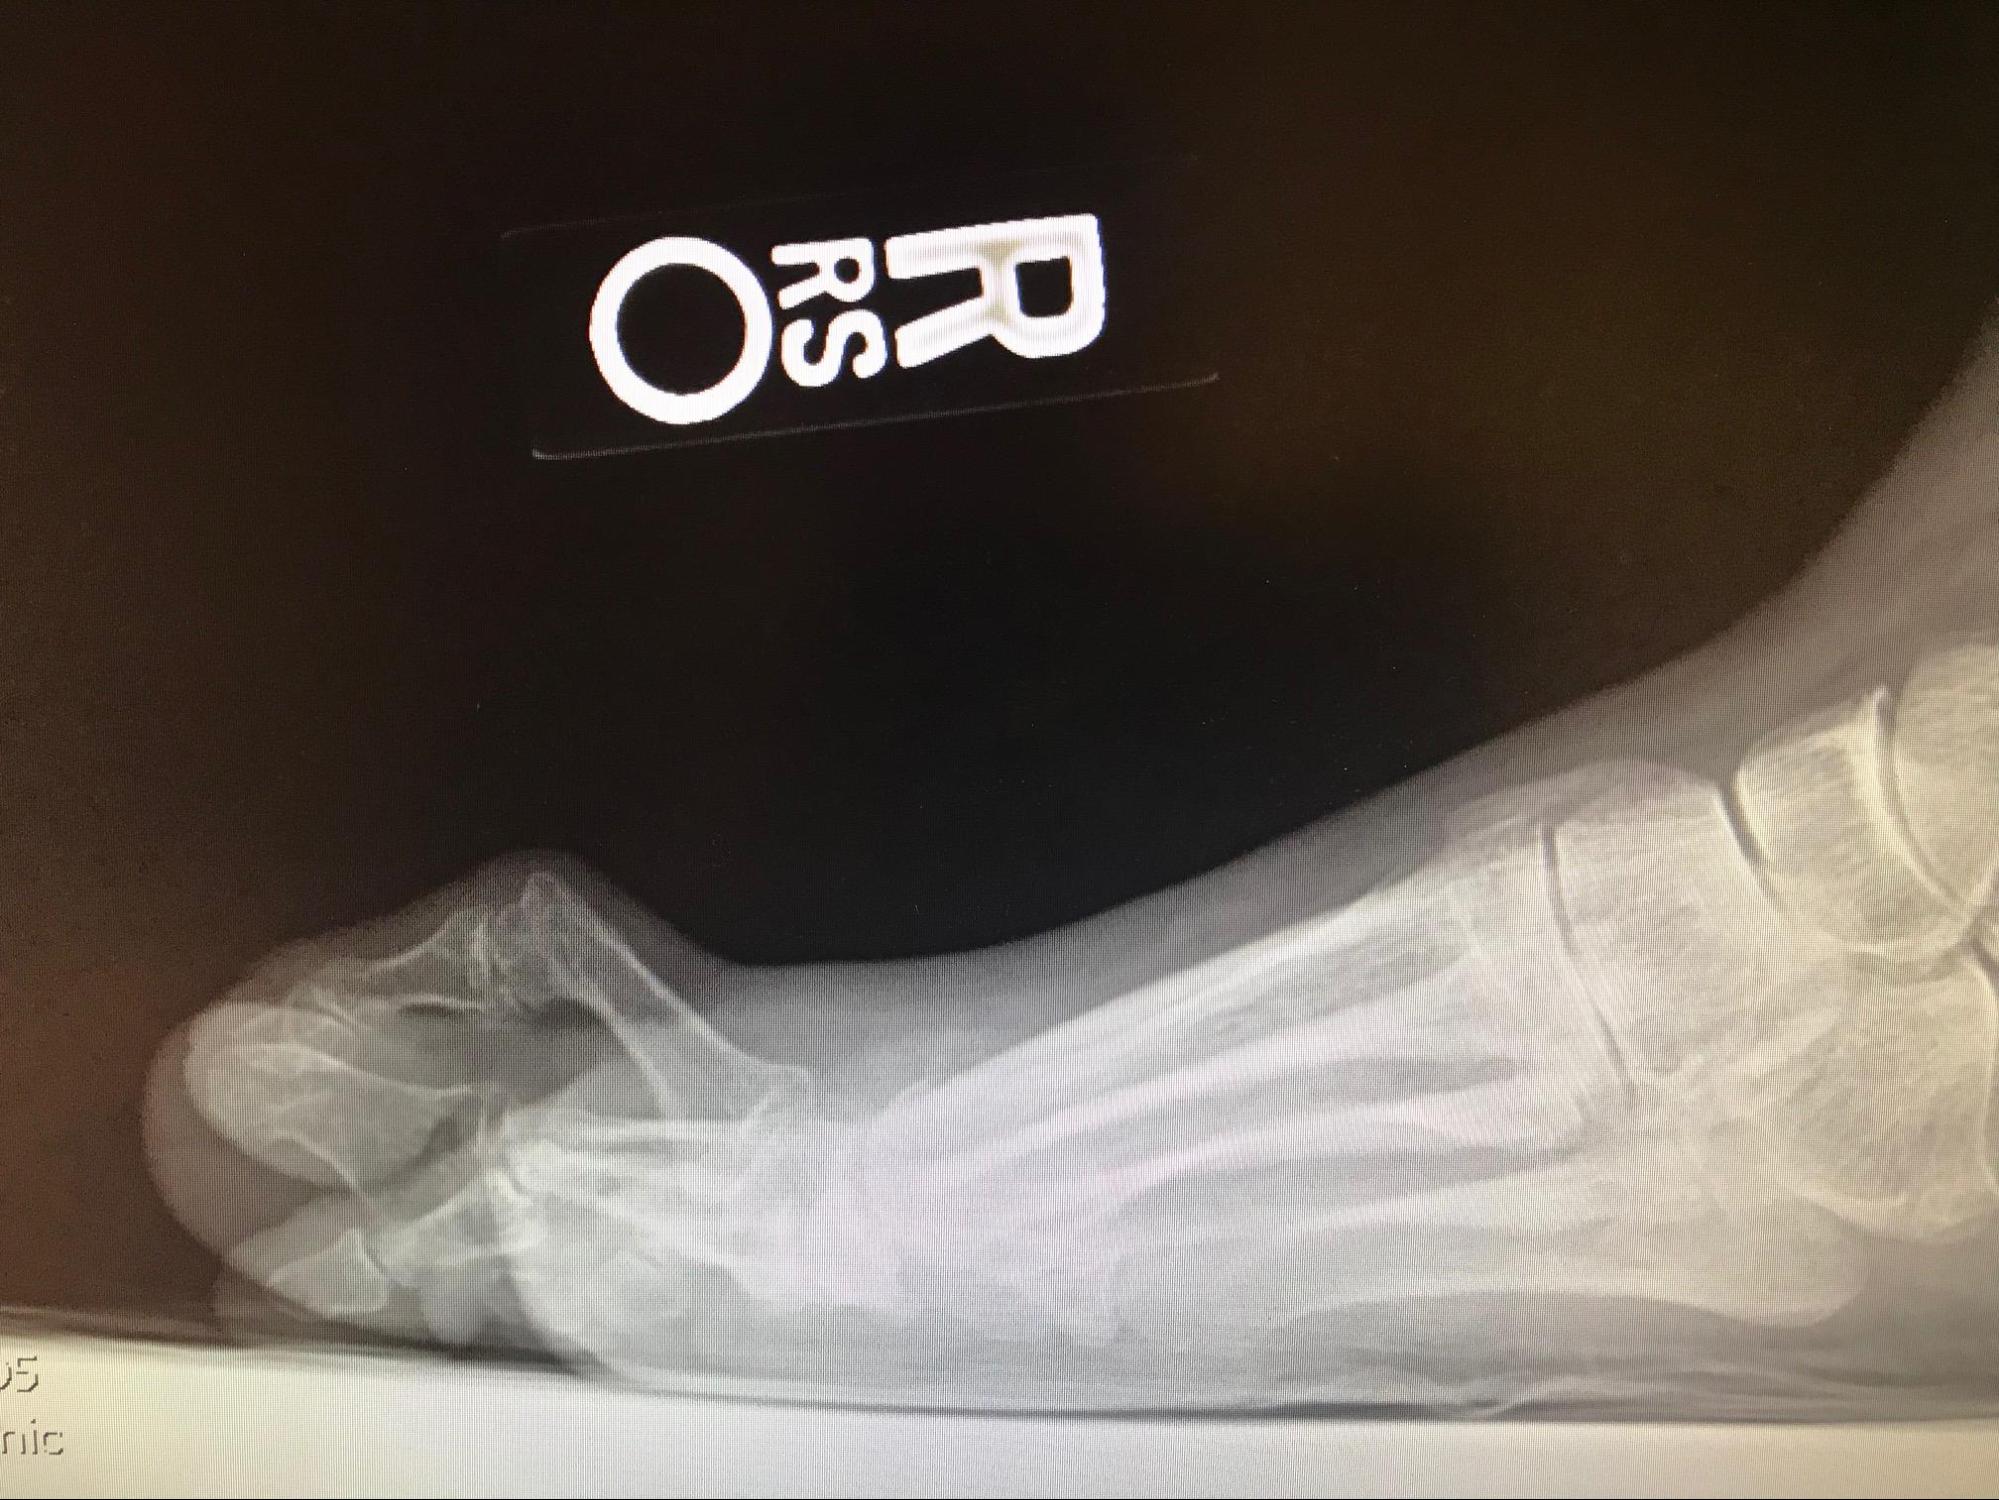 Hammertoe
Lateral weight-bearing radiograph demonstrating a hammertoe deformity with extension at the MPJ and contracture at the PIPJ